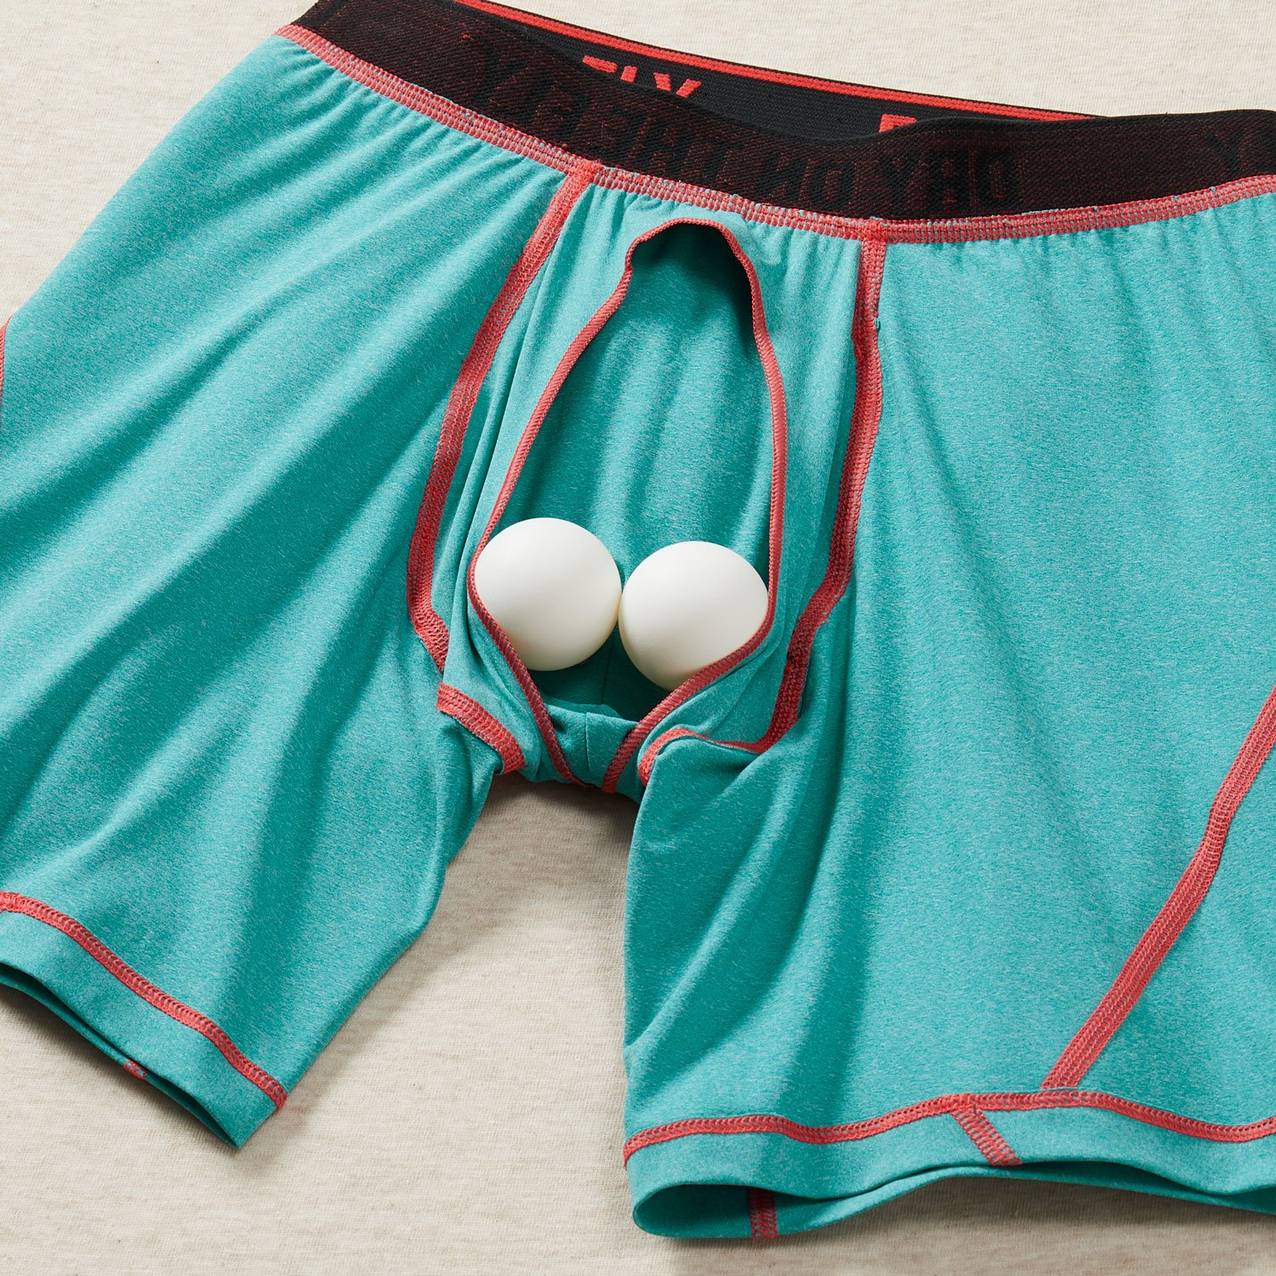 Two ping pong balls cradled in the bullpen pouch of a pair of boxer briefs